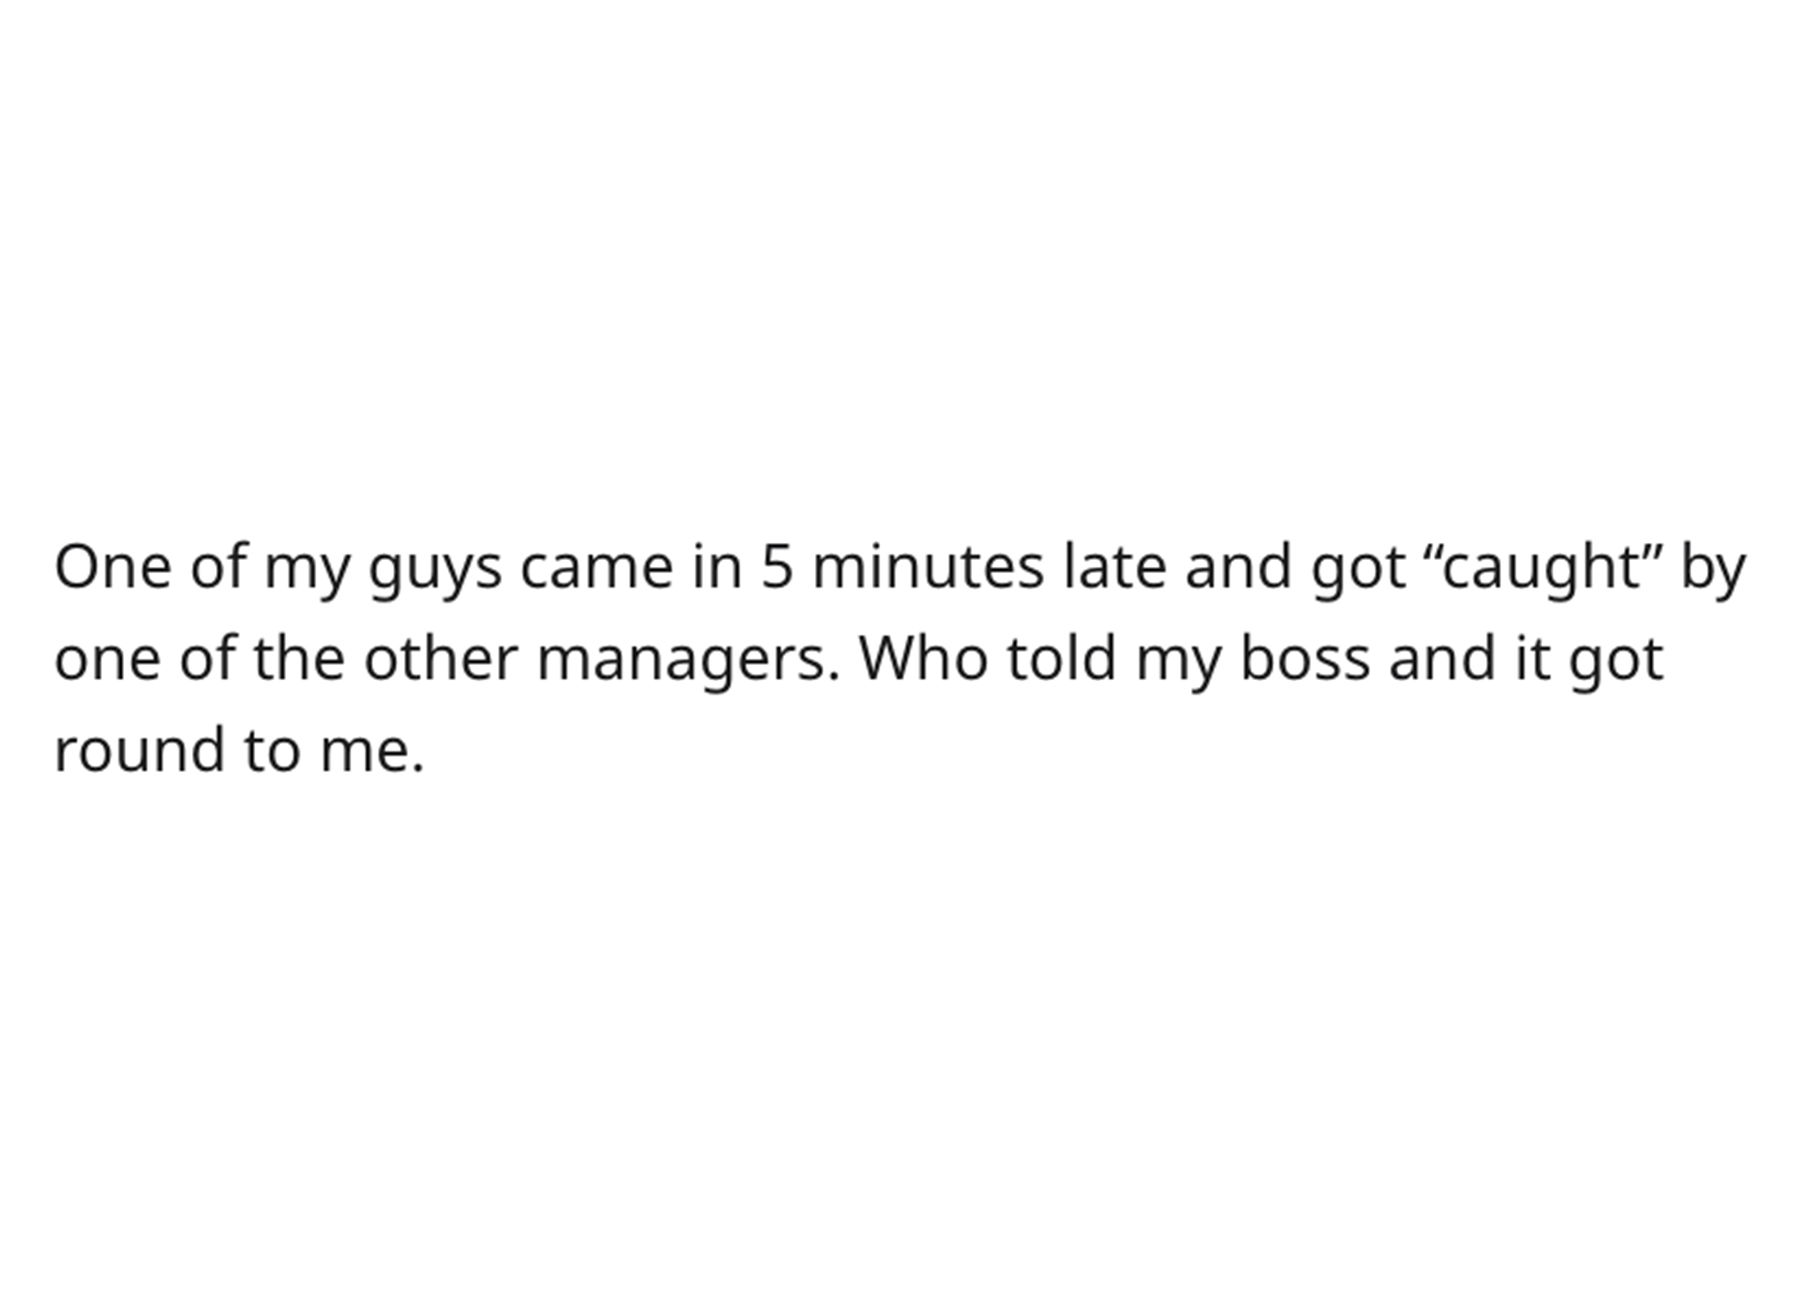 Supervisor Sticks it to Cheap Boss - hearing you look happier - One of my guys came in 5 minutes late and got "caught" by one of the other managers. Who told my boss and it got round to me.